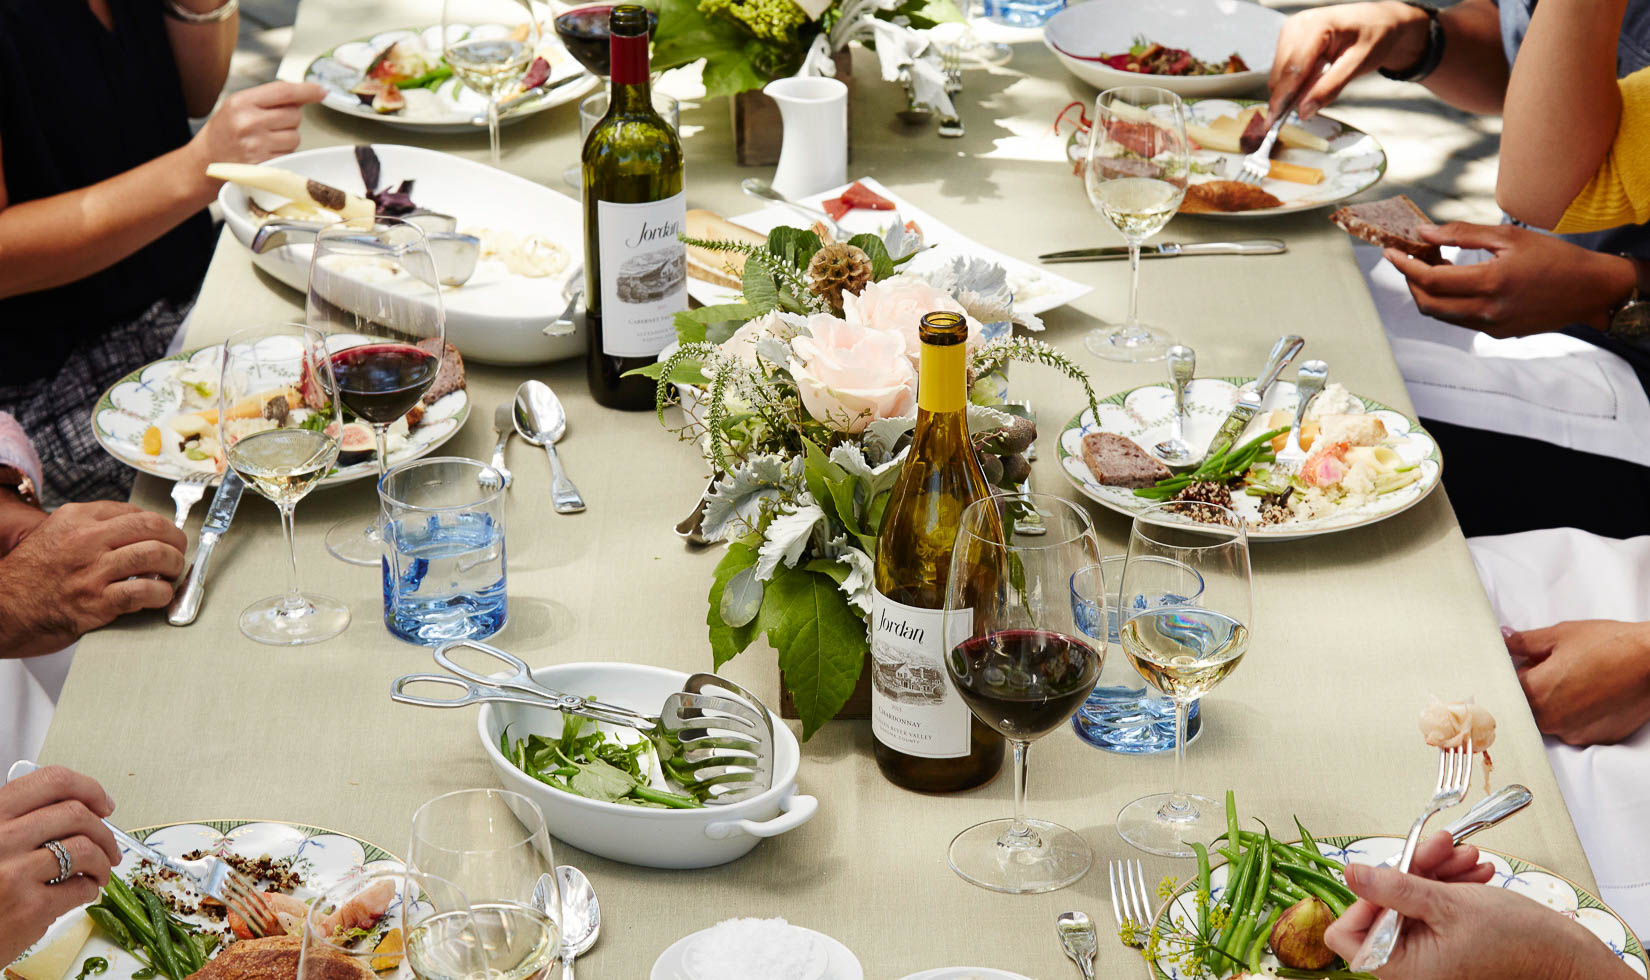 Table setting with wine, glasses, decorations